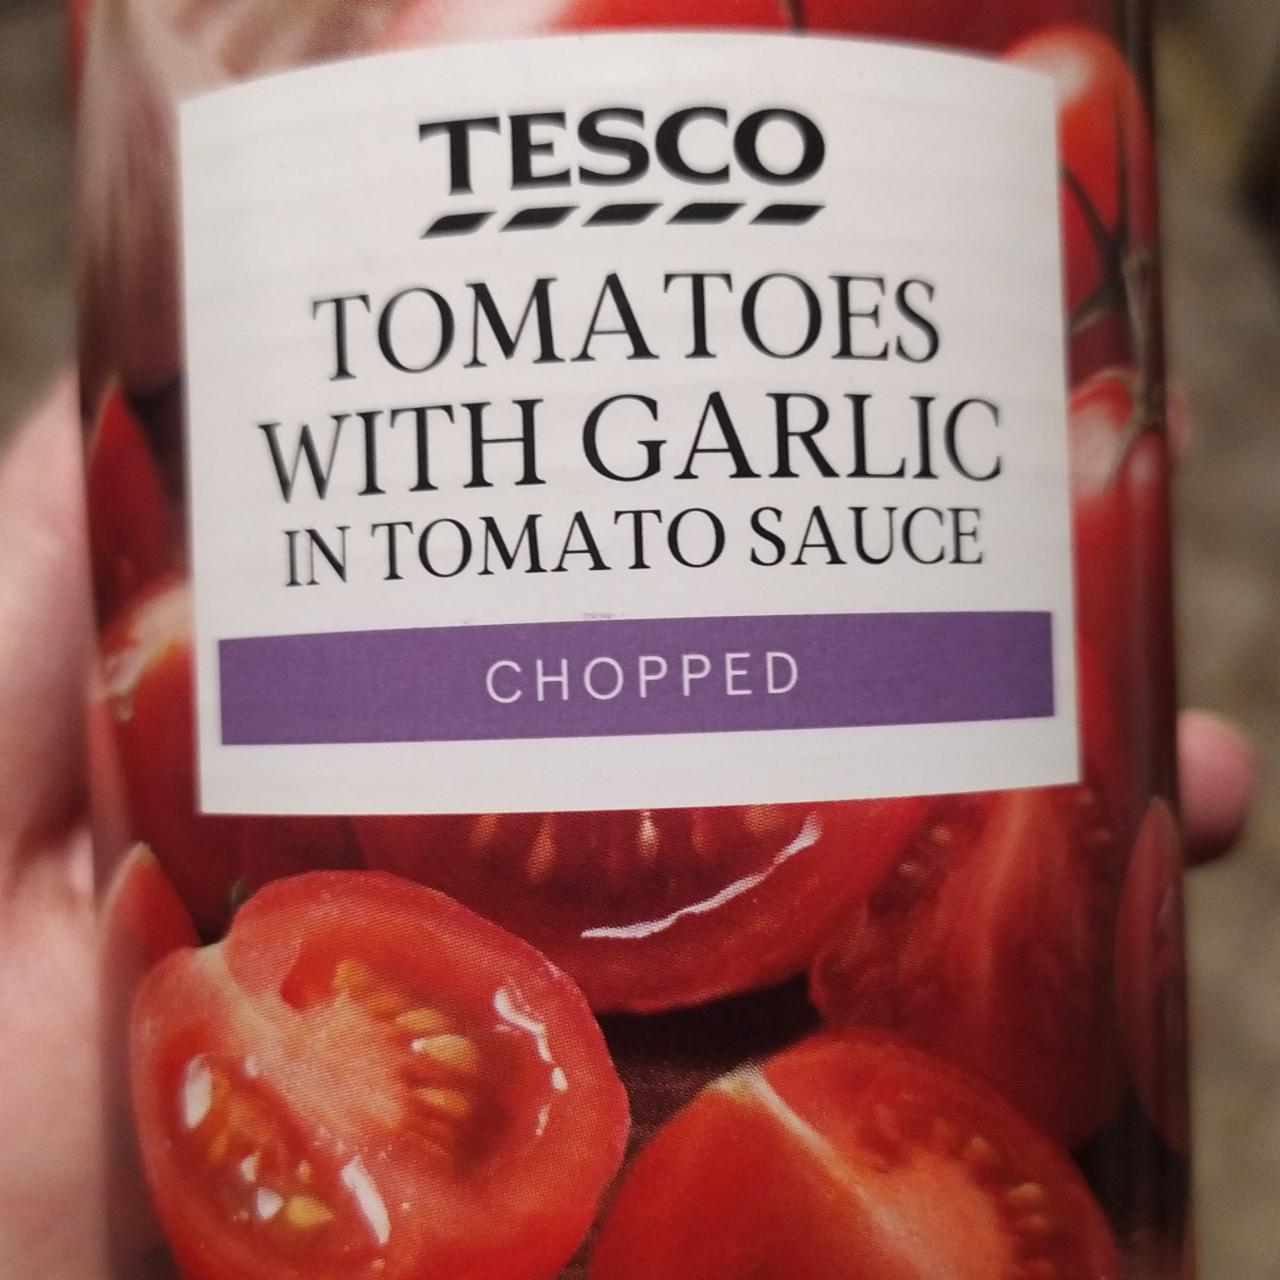 Fotografie - Tomatoes with Garlic in Tomato Sauce Chopped Tesco